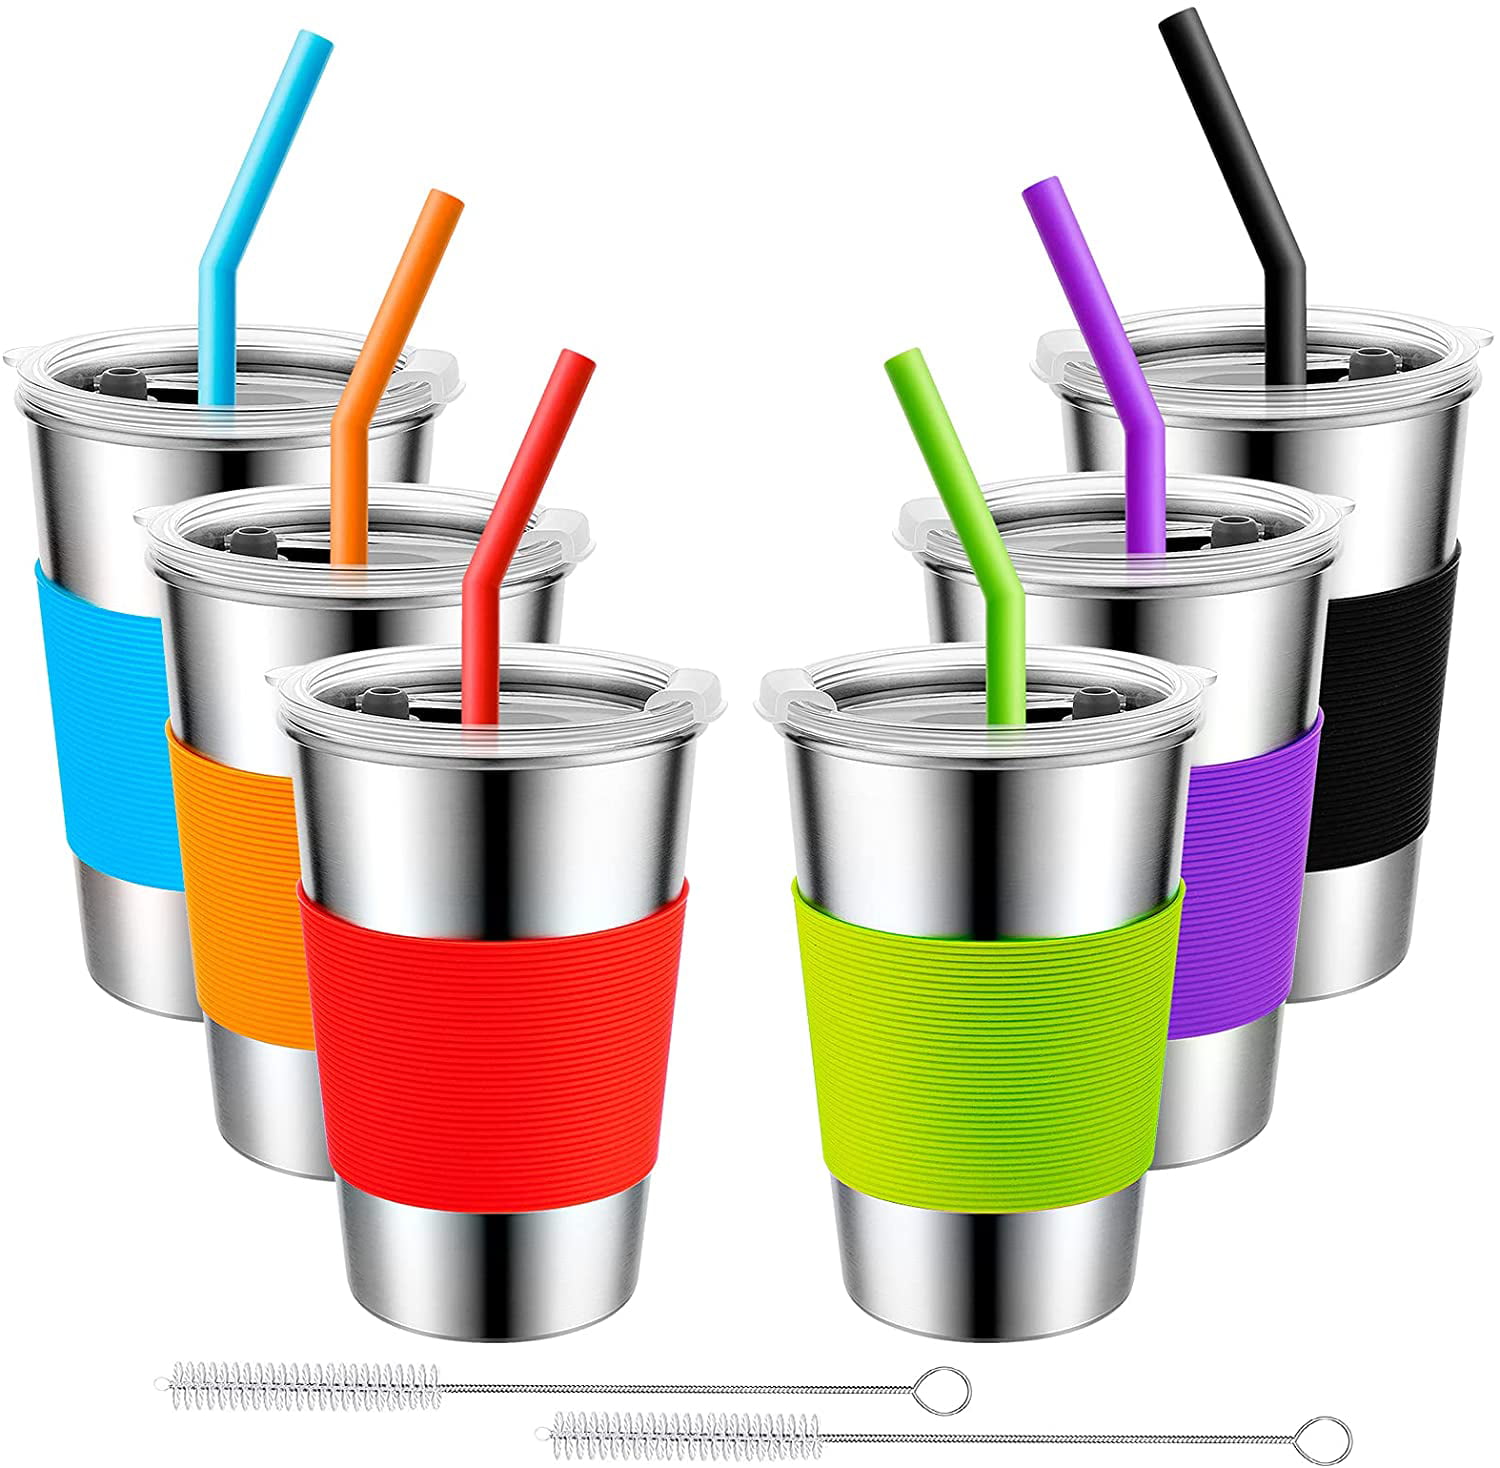 16 Oz Drinking Tumbler with Silicone Sleeves for Kids/Adults Stainless Steel Cups with Lids and Straws 4 Pack Unbreakable Metal 